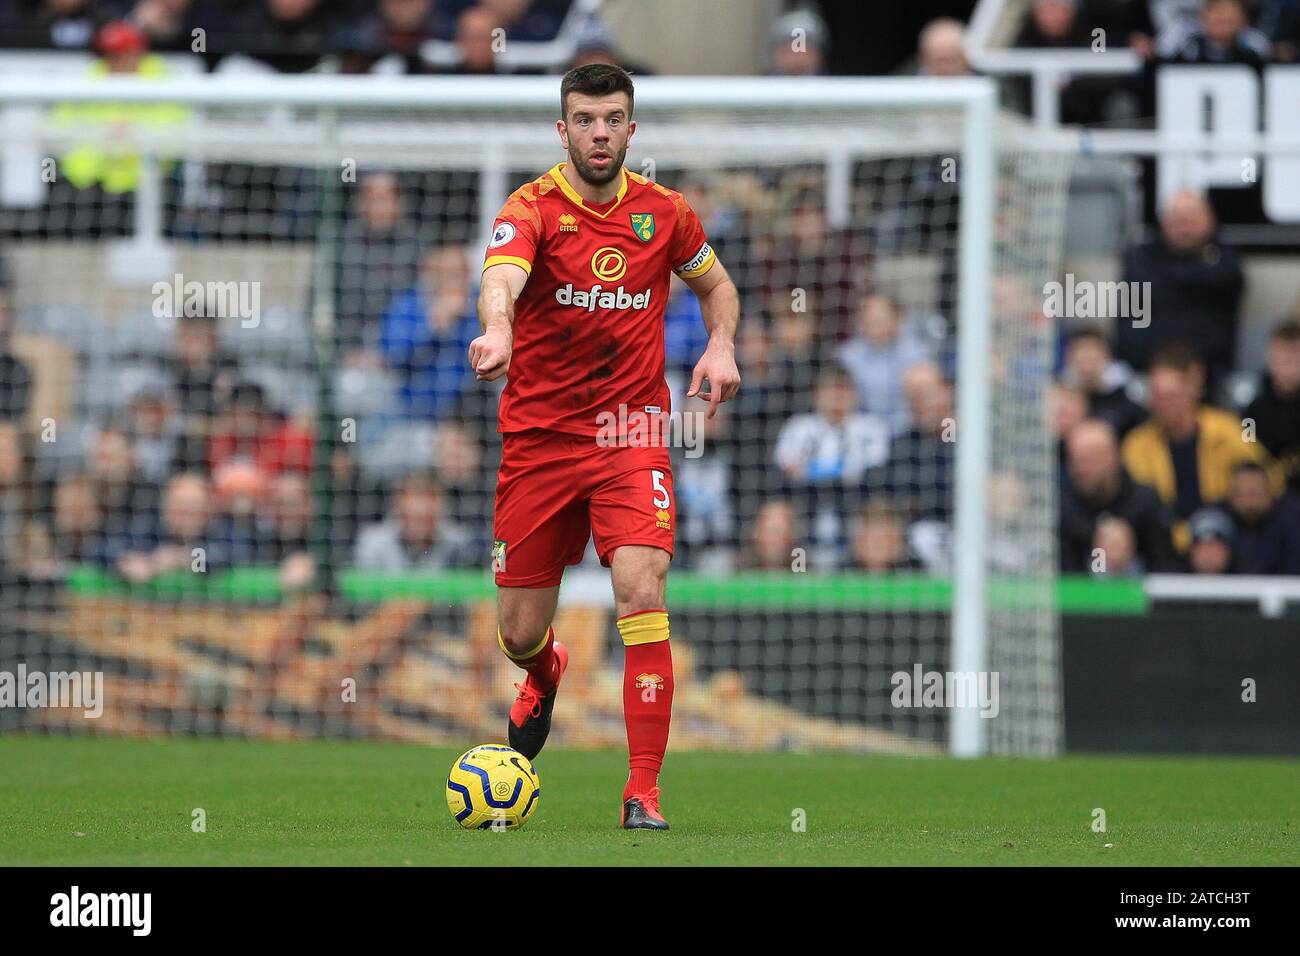 NEWCASTLE UPON TYNE, ENGLAND - FEBRUARY 1ST  Grant Hanley of Norwich City in action  during the Premier League match between Newcastle United and Norwich City at St. James's Park, Newcastle on Saturday 1st February 2020. (Credit: Mark Fletcher | MI News)  Photograph may only be used for newspaper and/or magazine editorial purposes, license required for commercial use Stock Photo